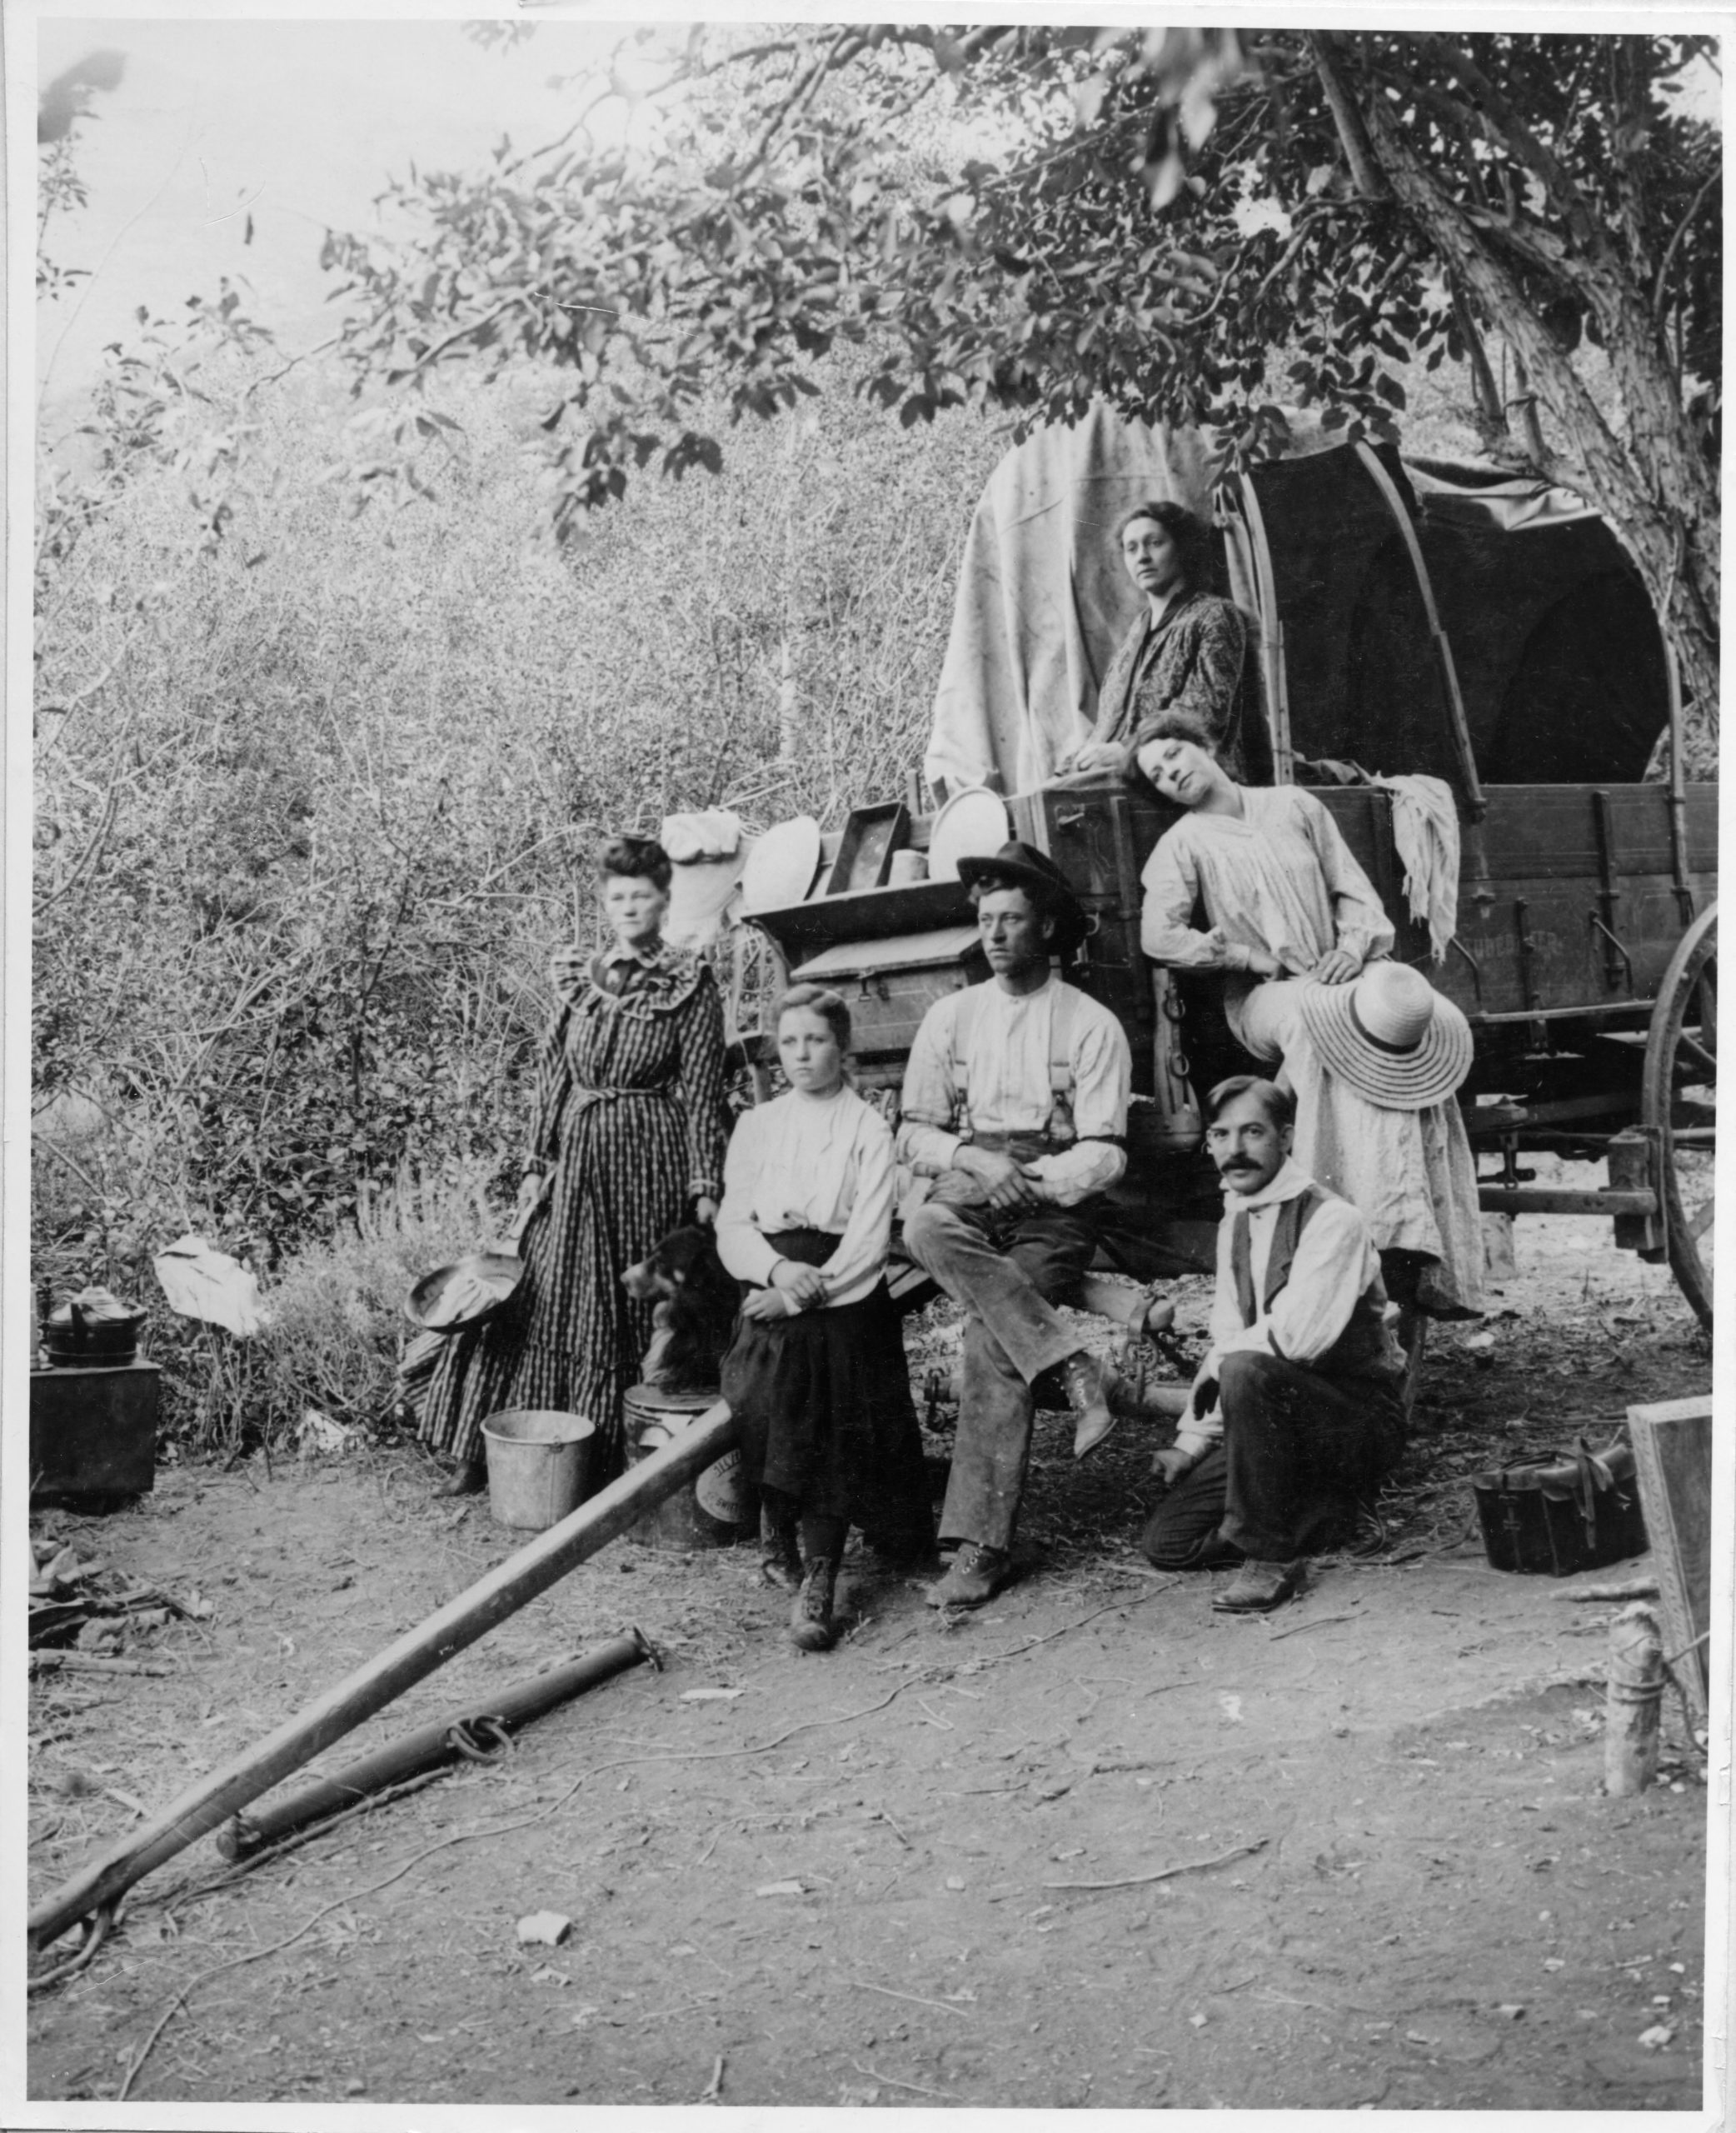 A photographer (right) and others in a staged scene on a covered wagon depicting life on the trail.